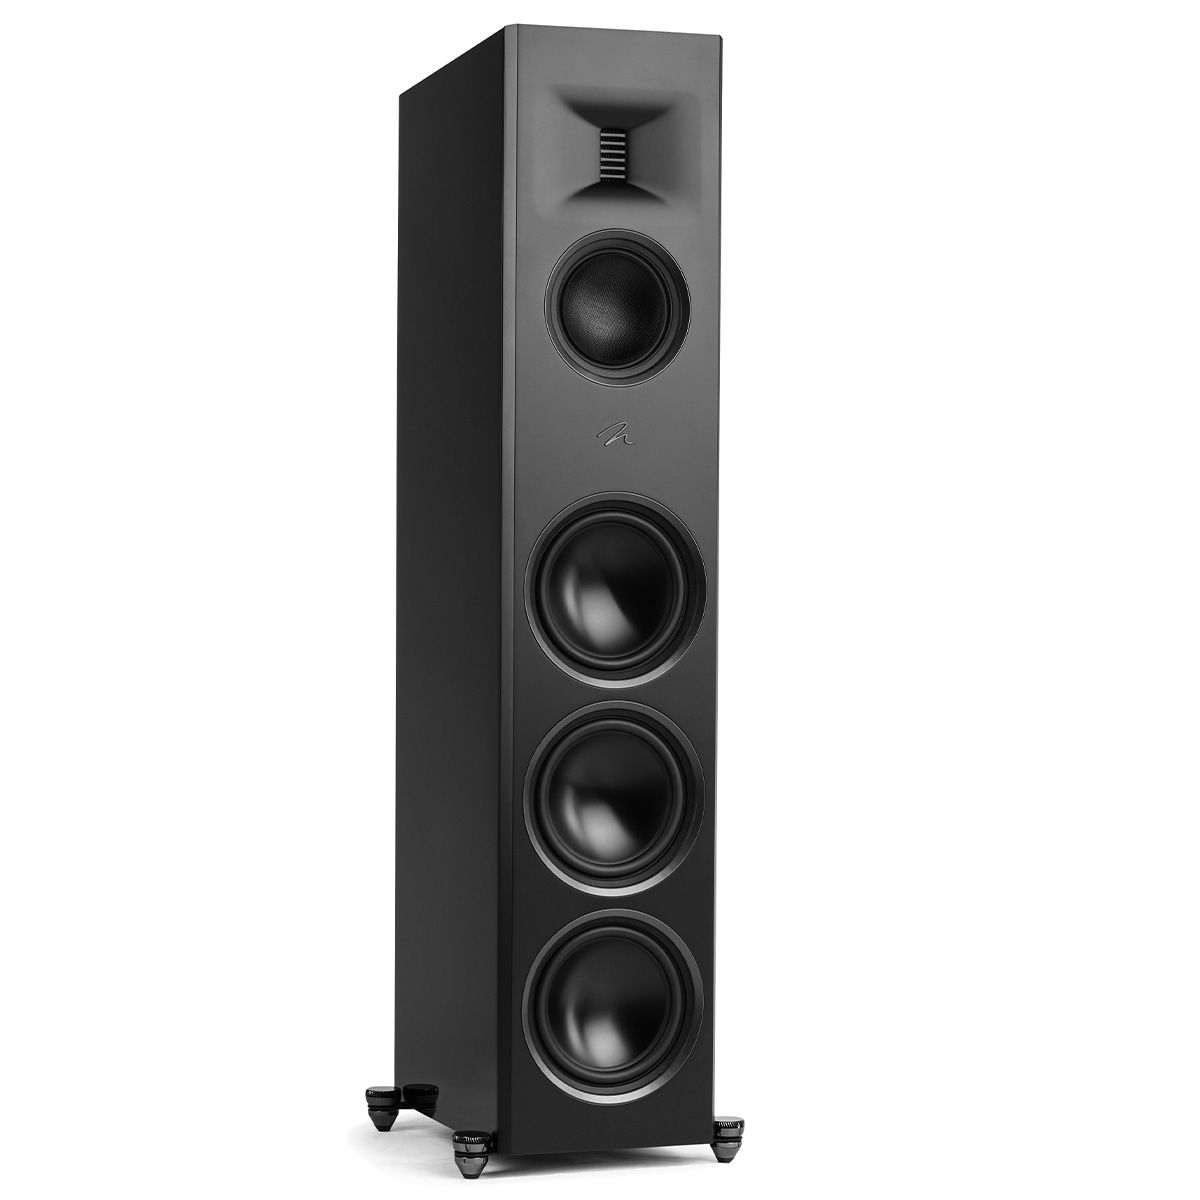 MartinLogan Motion XT F200  Floorstanding Speaker in black, angled view without grilles